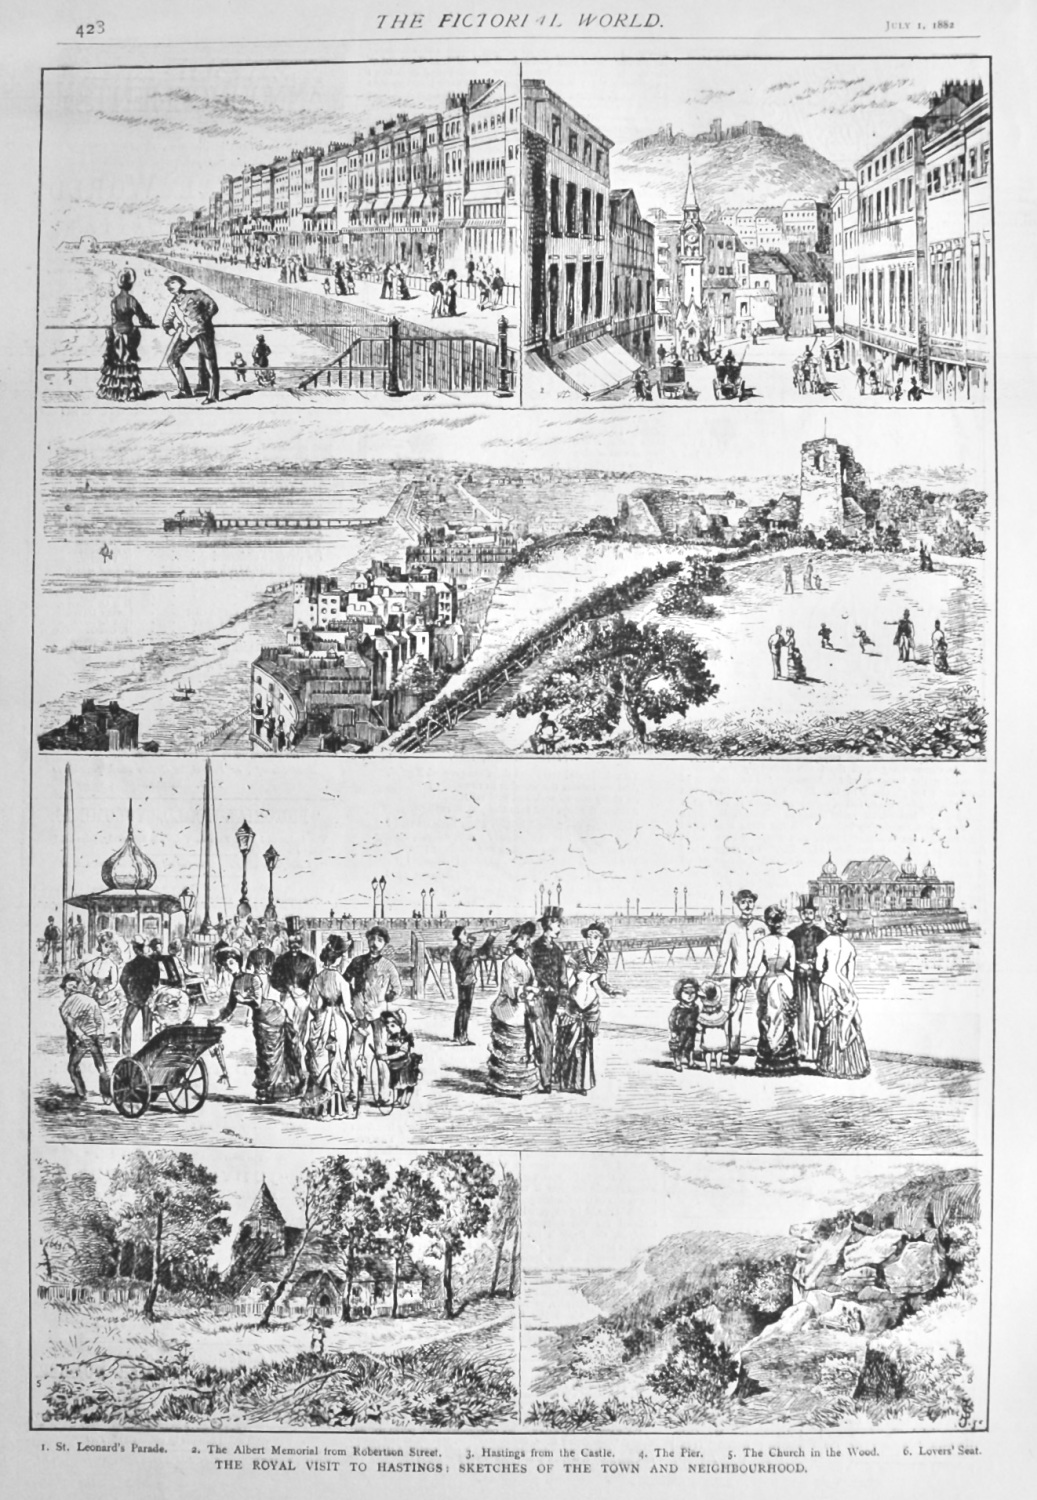 The Royal Visit to Hastings : Sketches of the Town and Neighbourhood.  1882